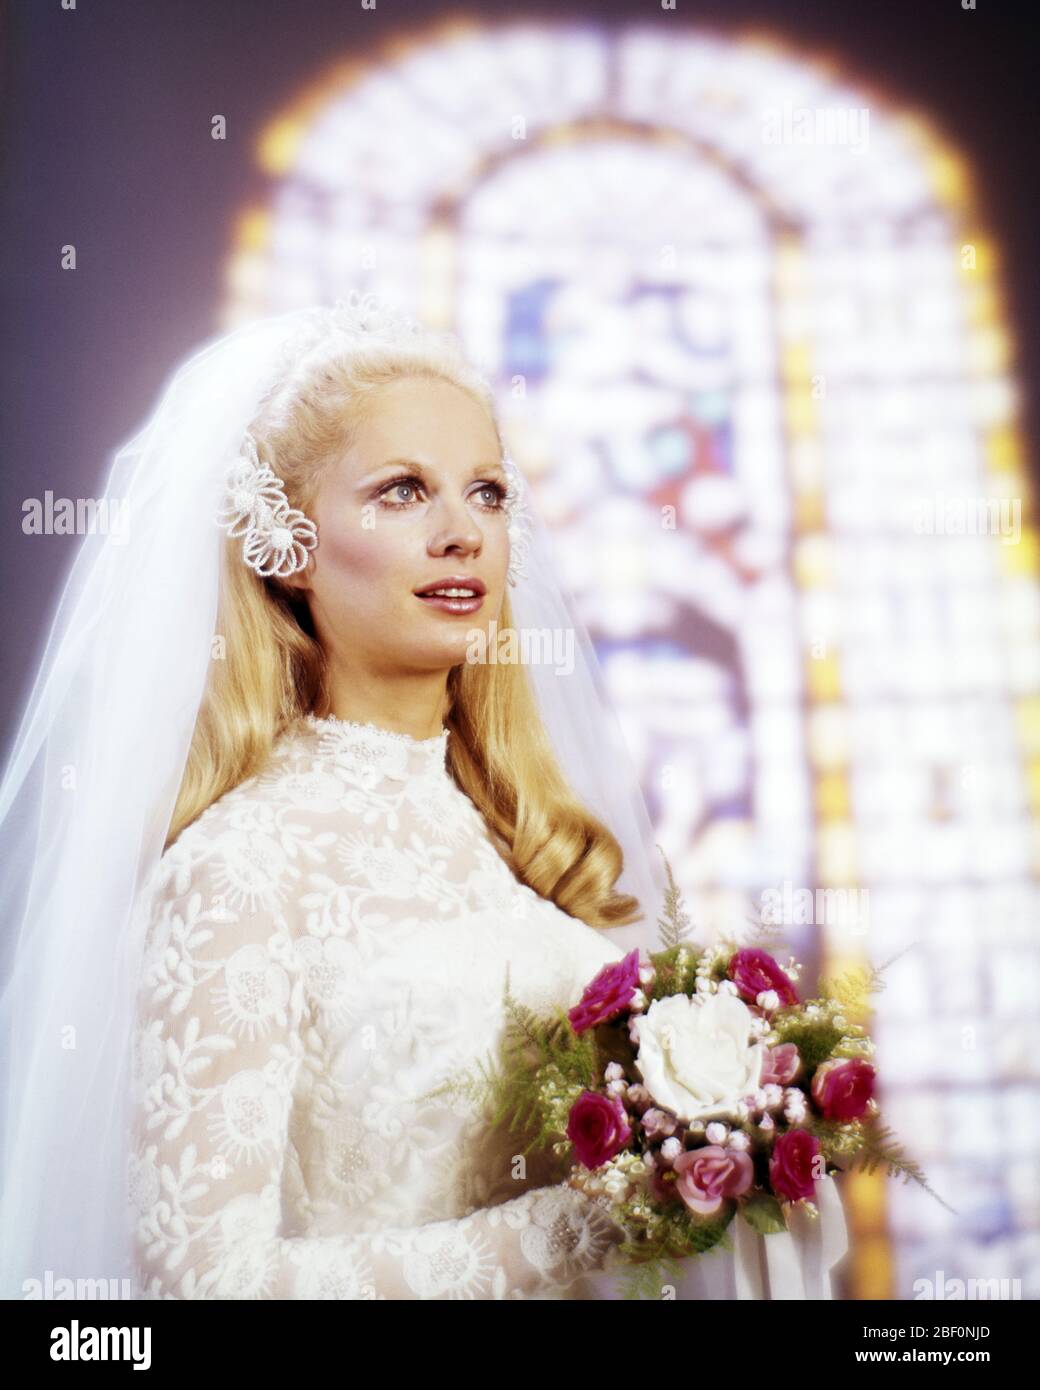 1960s BLONDE WOMAN BRIDE WEARING LACE BRIDAL GOWN NET VEIL HOLDING RED AND WHITE BOUQUET  IN FRONT OF STAINED GLASS WINDOW - kb9221 PHT001 HARS MARRIED STUDIO SHOT EVENT COPY SPACE FULL-LENGTH LADIES MARRIAGE PERSONS VEIL CONFIDENCE CEREMONY BRIDAL DREAMS BRIDES RELIGIOUS CUSTOM AND TRADITION NUPTIAL NUPTIALS OCCASION MARRYING PRIDE HEADPIECE RITE OF PASSAGE STYLISH WED FAITHFUL FAITH LOOKING UP MARRY MATRIMONY YOUNG ADULT WOMAN BELIEF CAUCASIAN ETHNICITY OLD FASHIONED Stock Photo